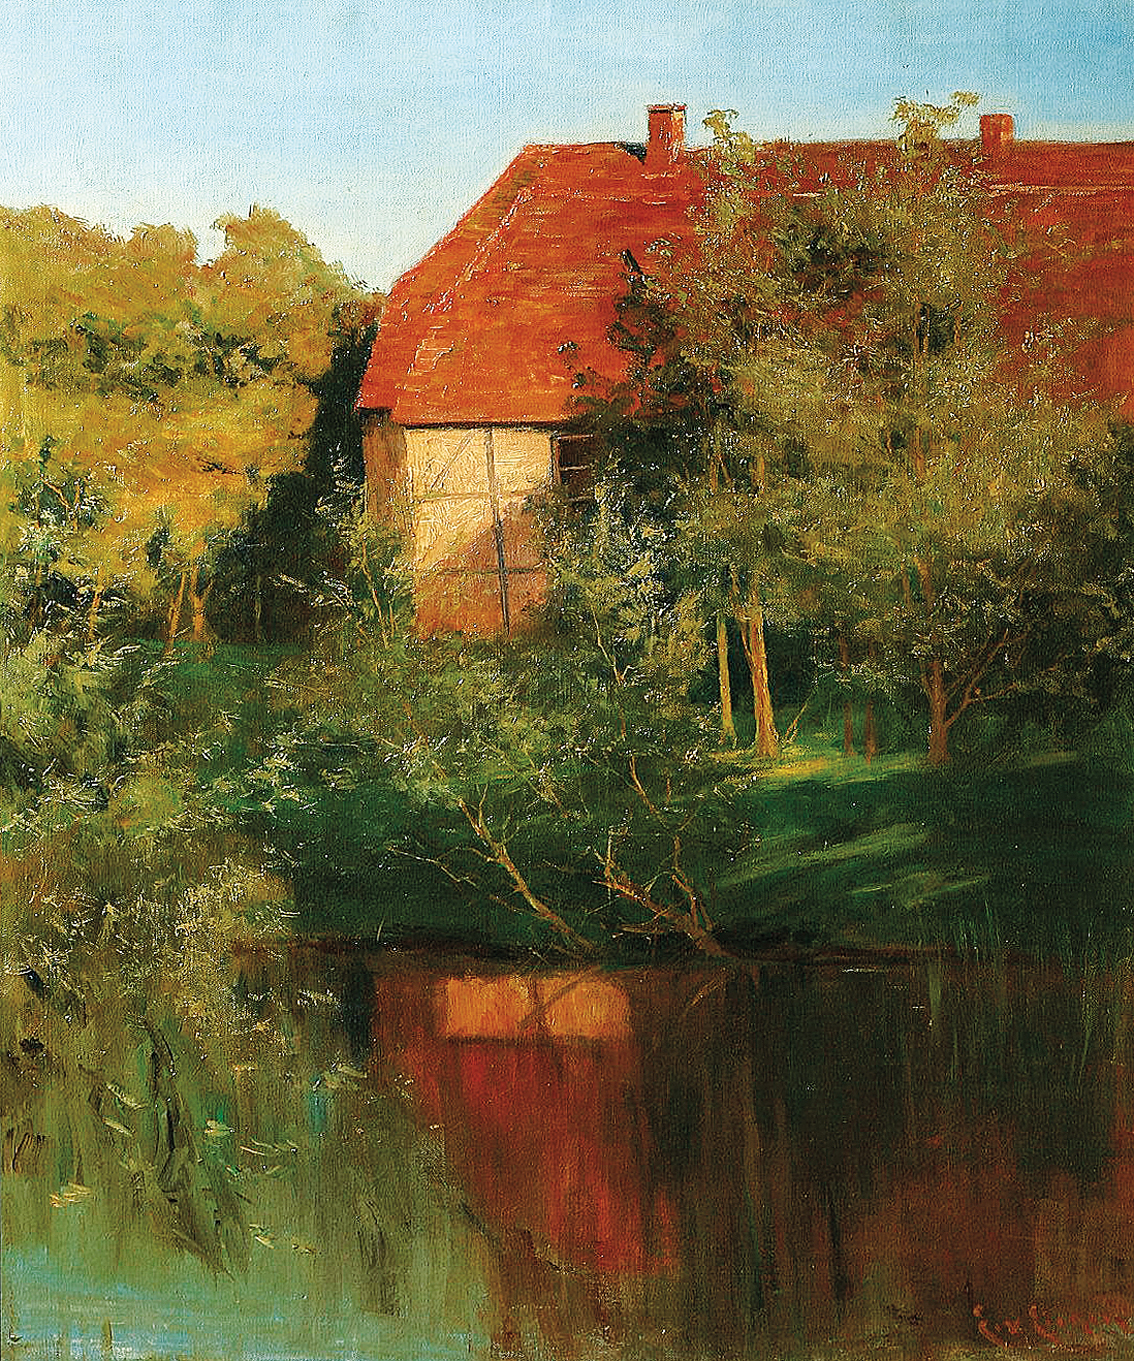 "A cottage at a pond in sunset"